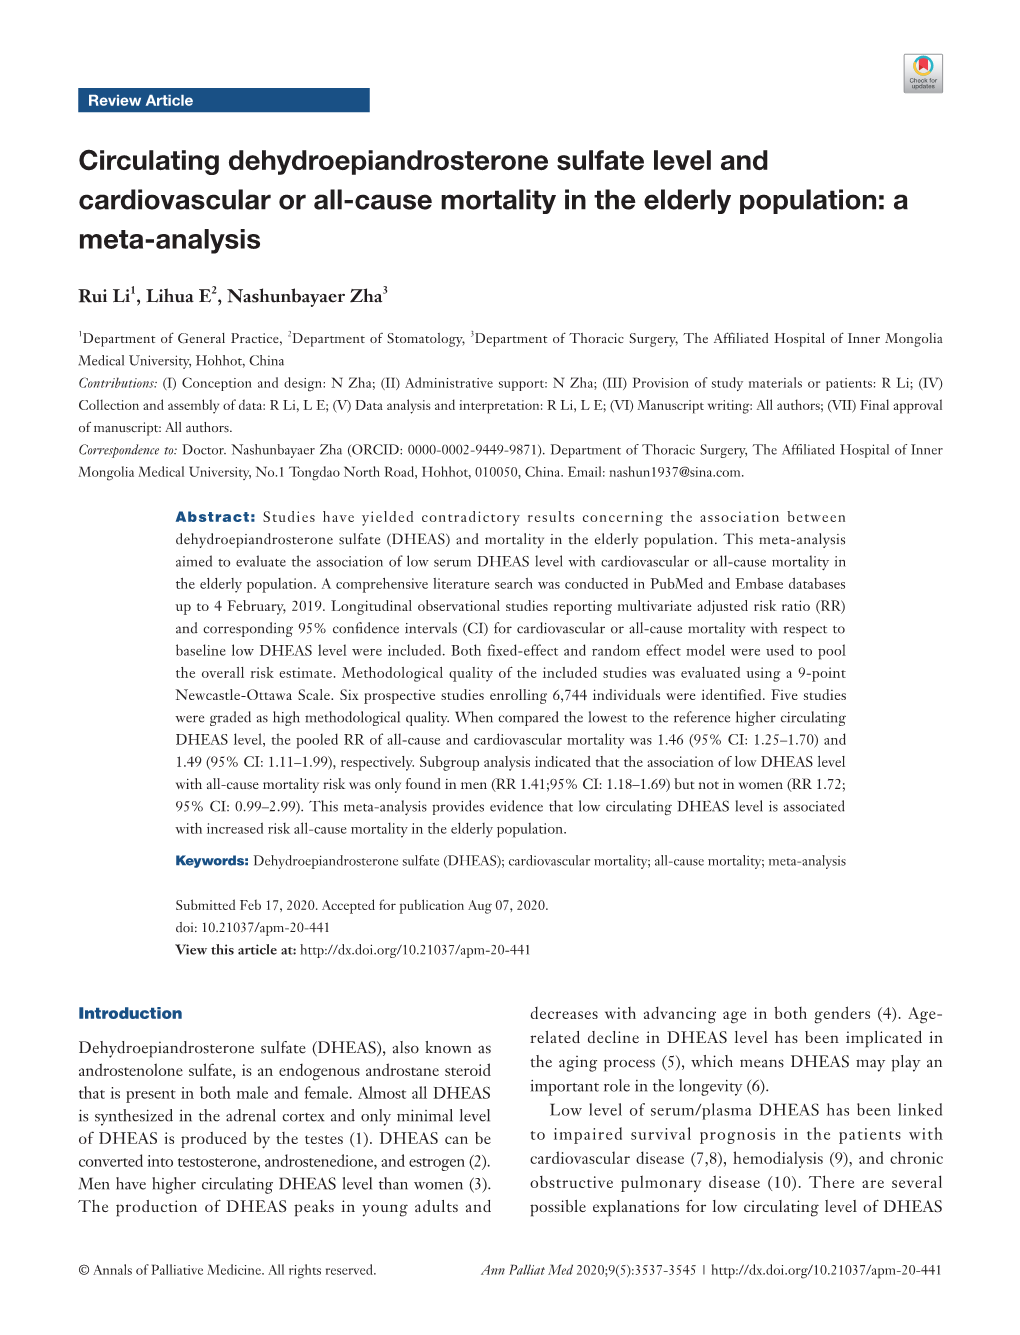 Circulating Dehydroepiandrosterone Sulfate Level and Cardiovascular Or All-Cause Mortality in the Elderly Population: a Meta-Analysis